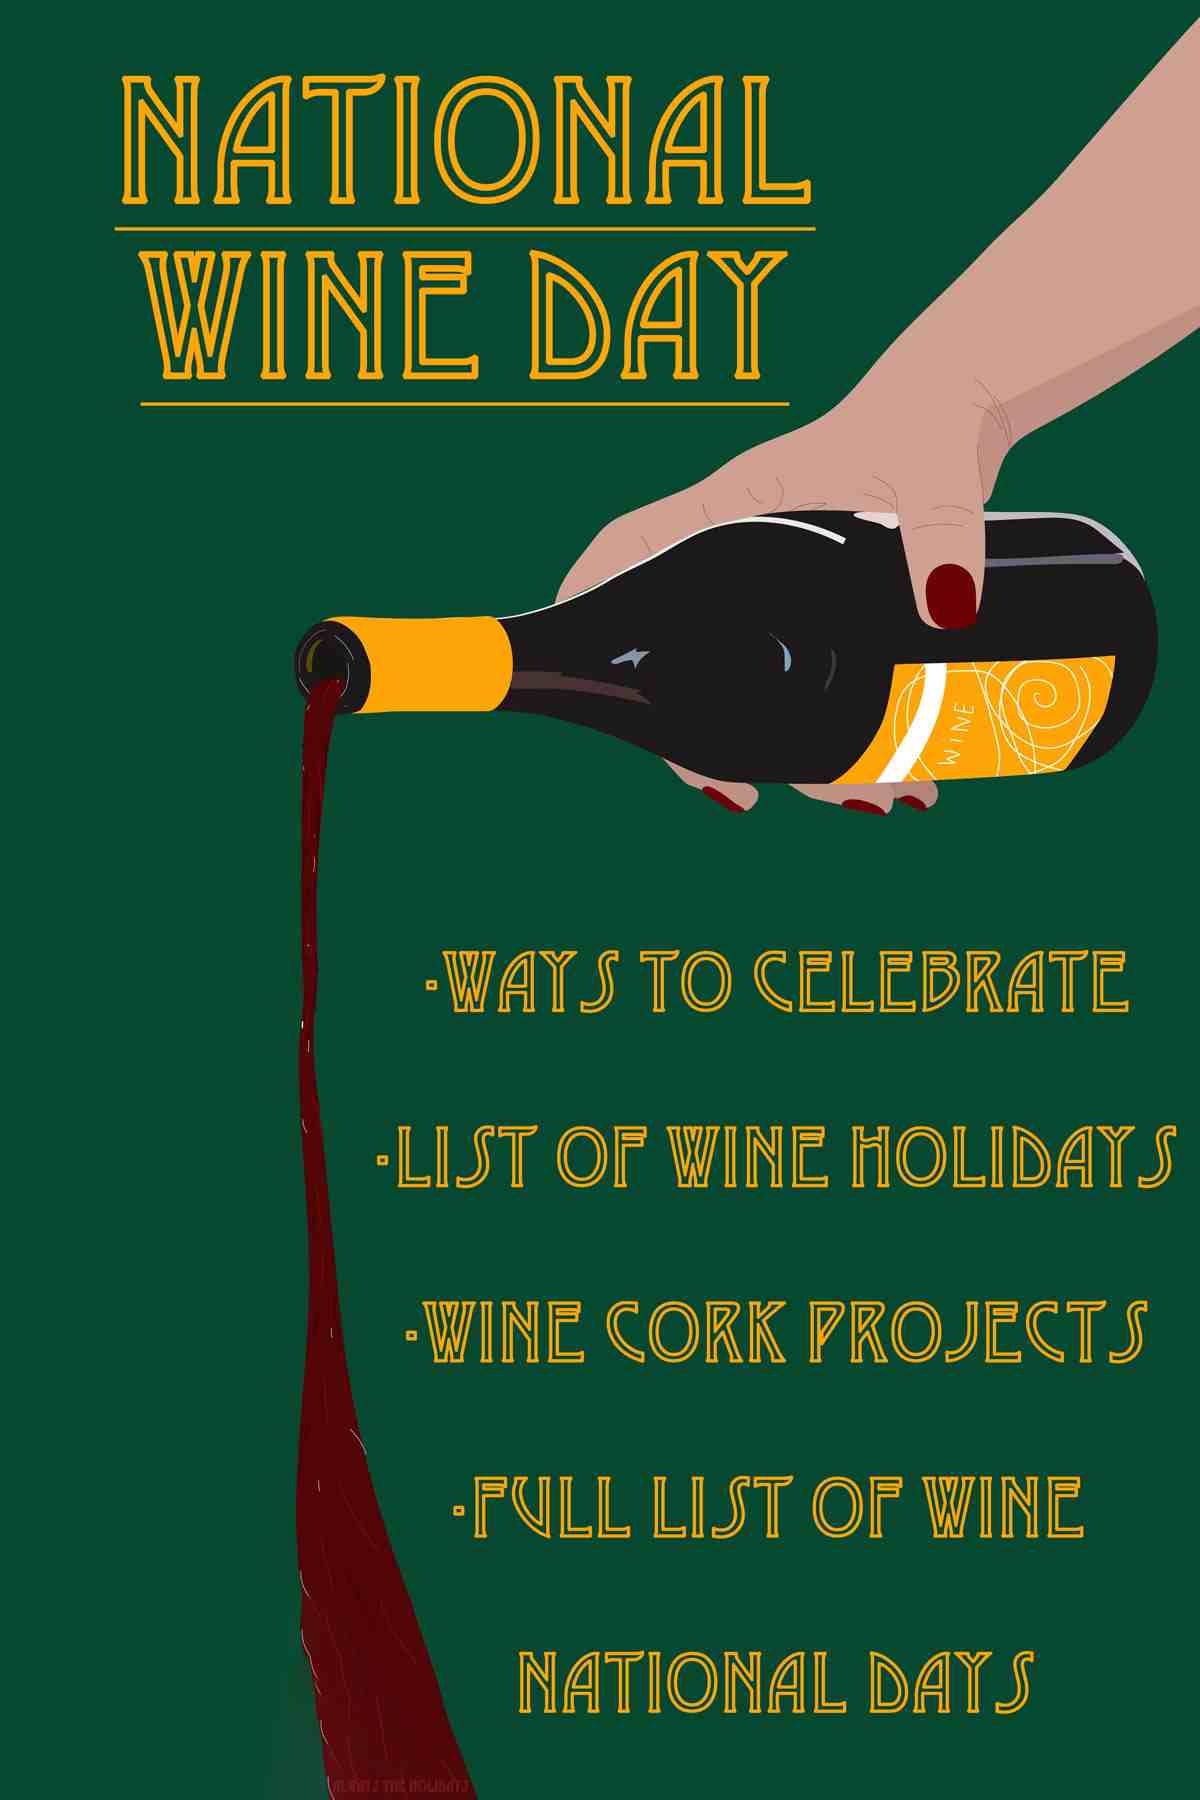 A clipart hand pouring a bottle of red wine on a green background with a text overlay that reads "National Wine Day, ways to celebrate, list of wine holidays, wine cork projects and full list of wine national days".